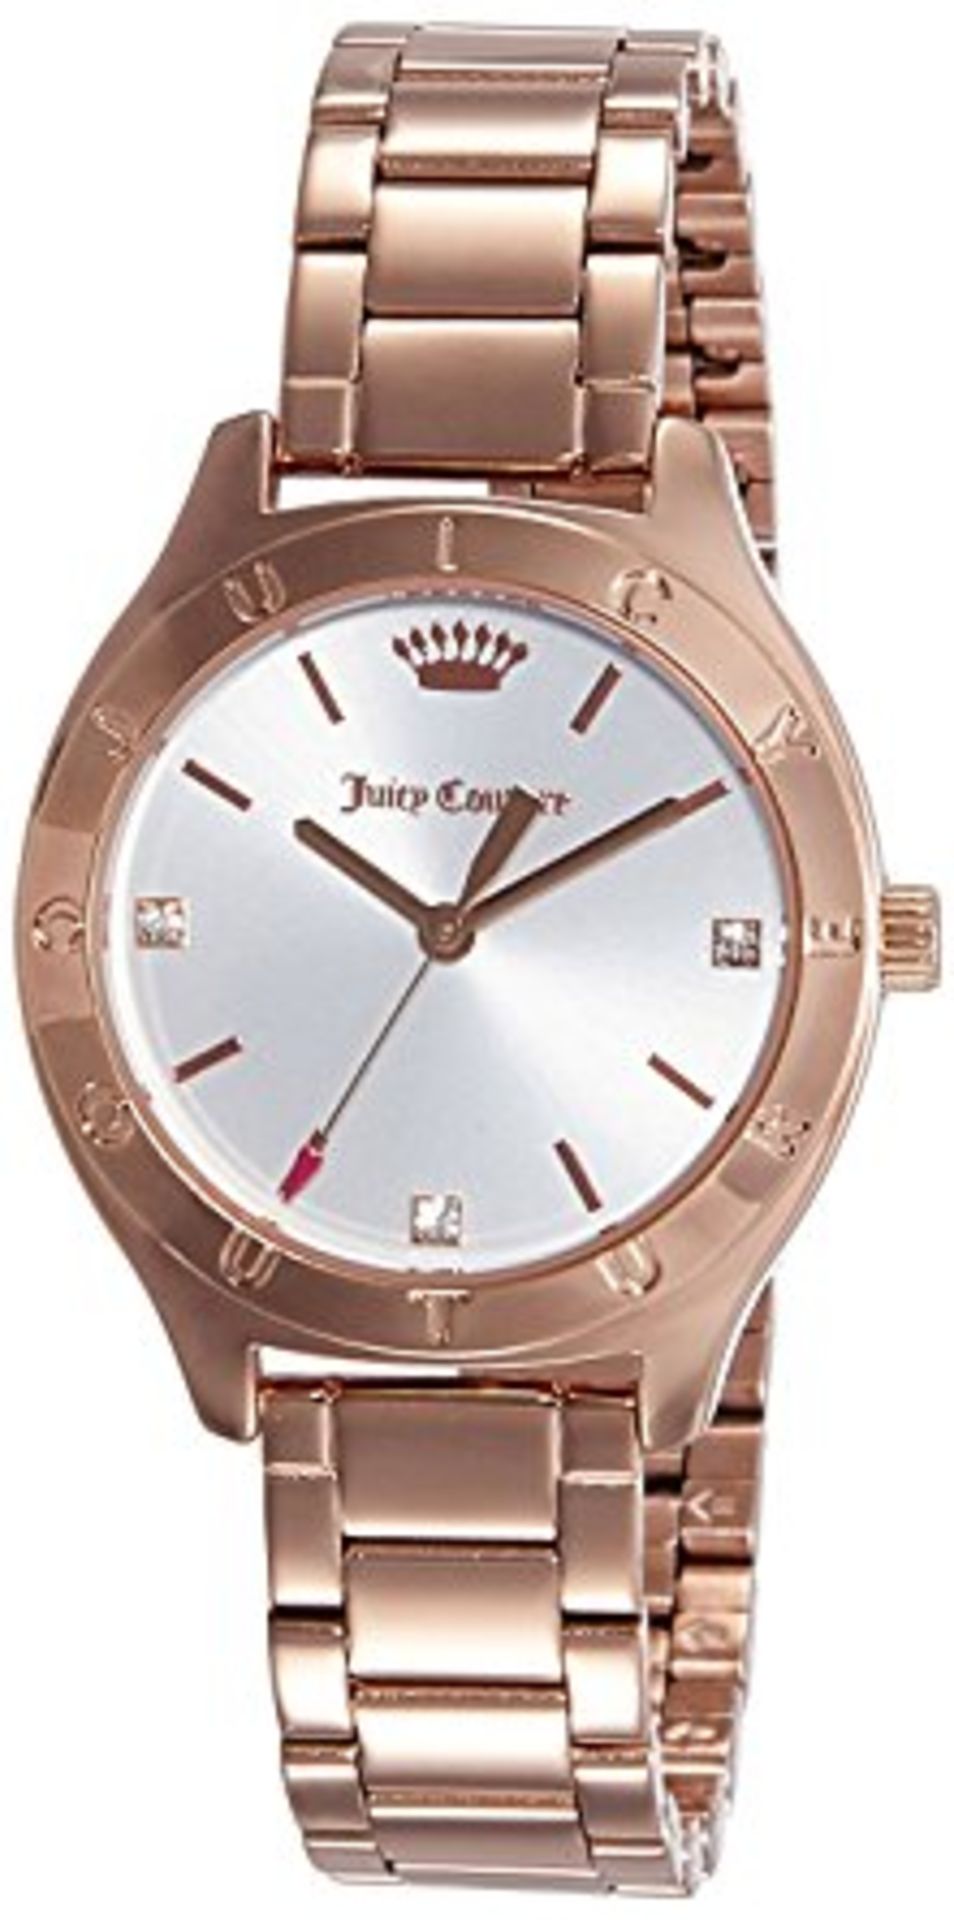 BRAND NEW JUICY COUTURE LADIES WRIST WATCH WITH 2 YEARS INTERNATIONAL WARRANTY (1901542)